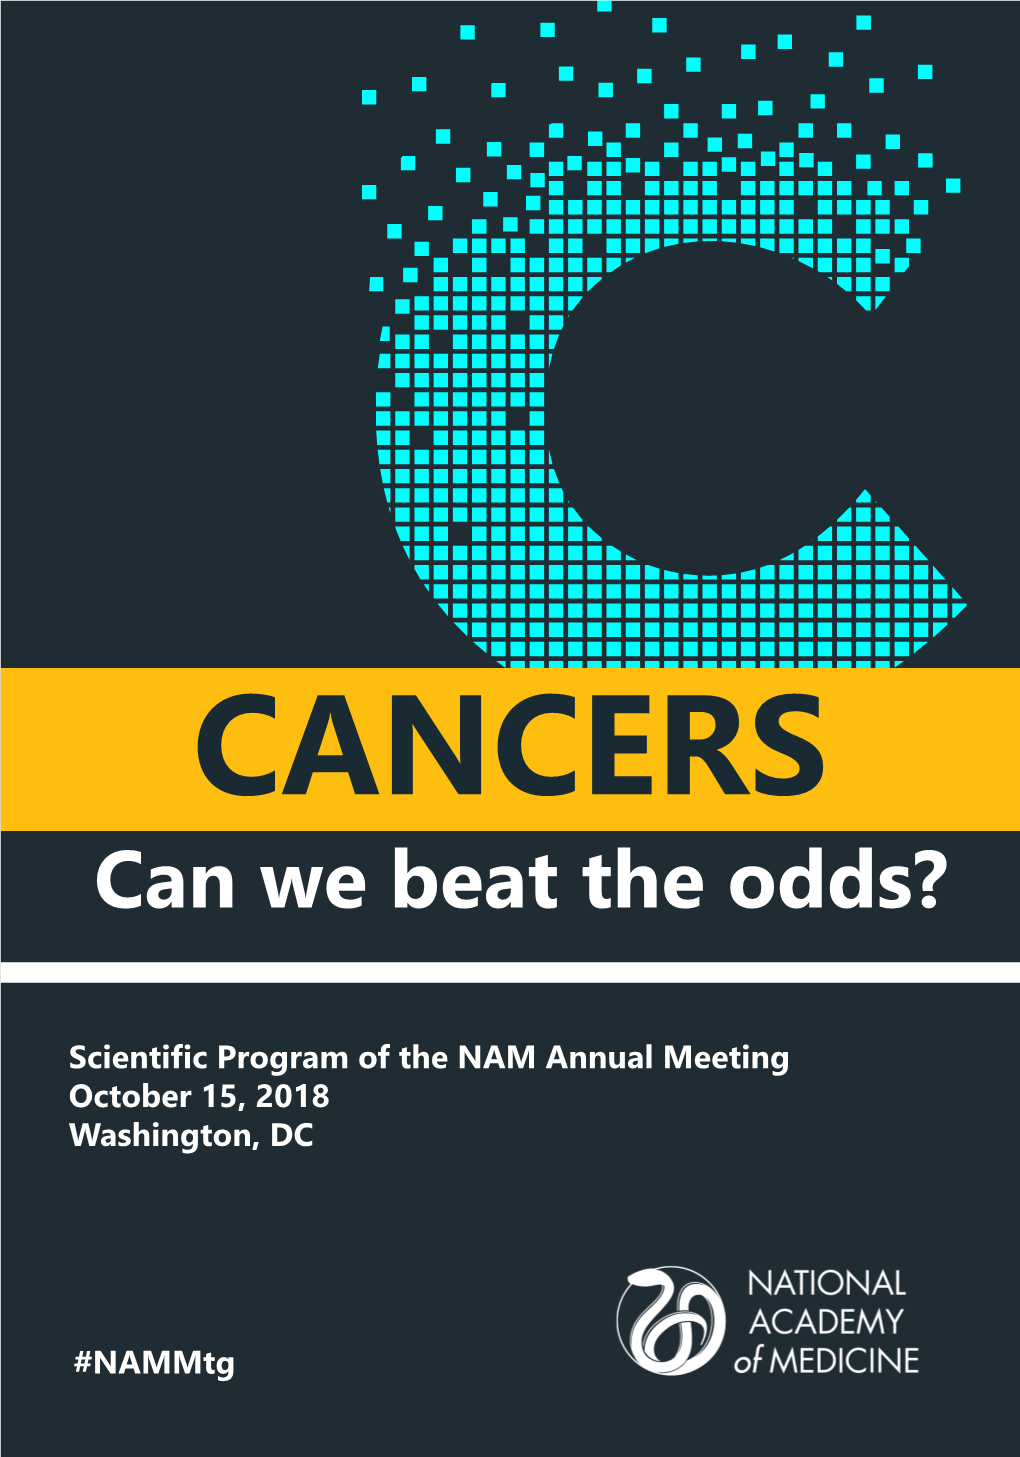 CANCERS Can We Beat the Odds? Scientific Program of the NAM Annual Meeting October 15, 2018